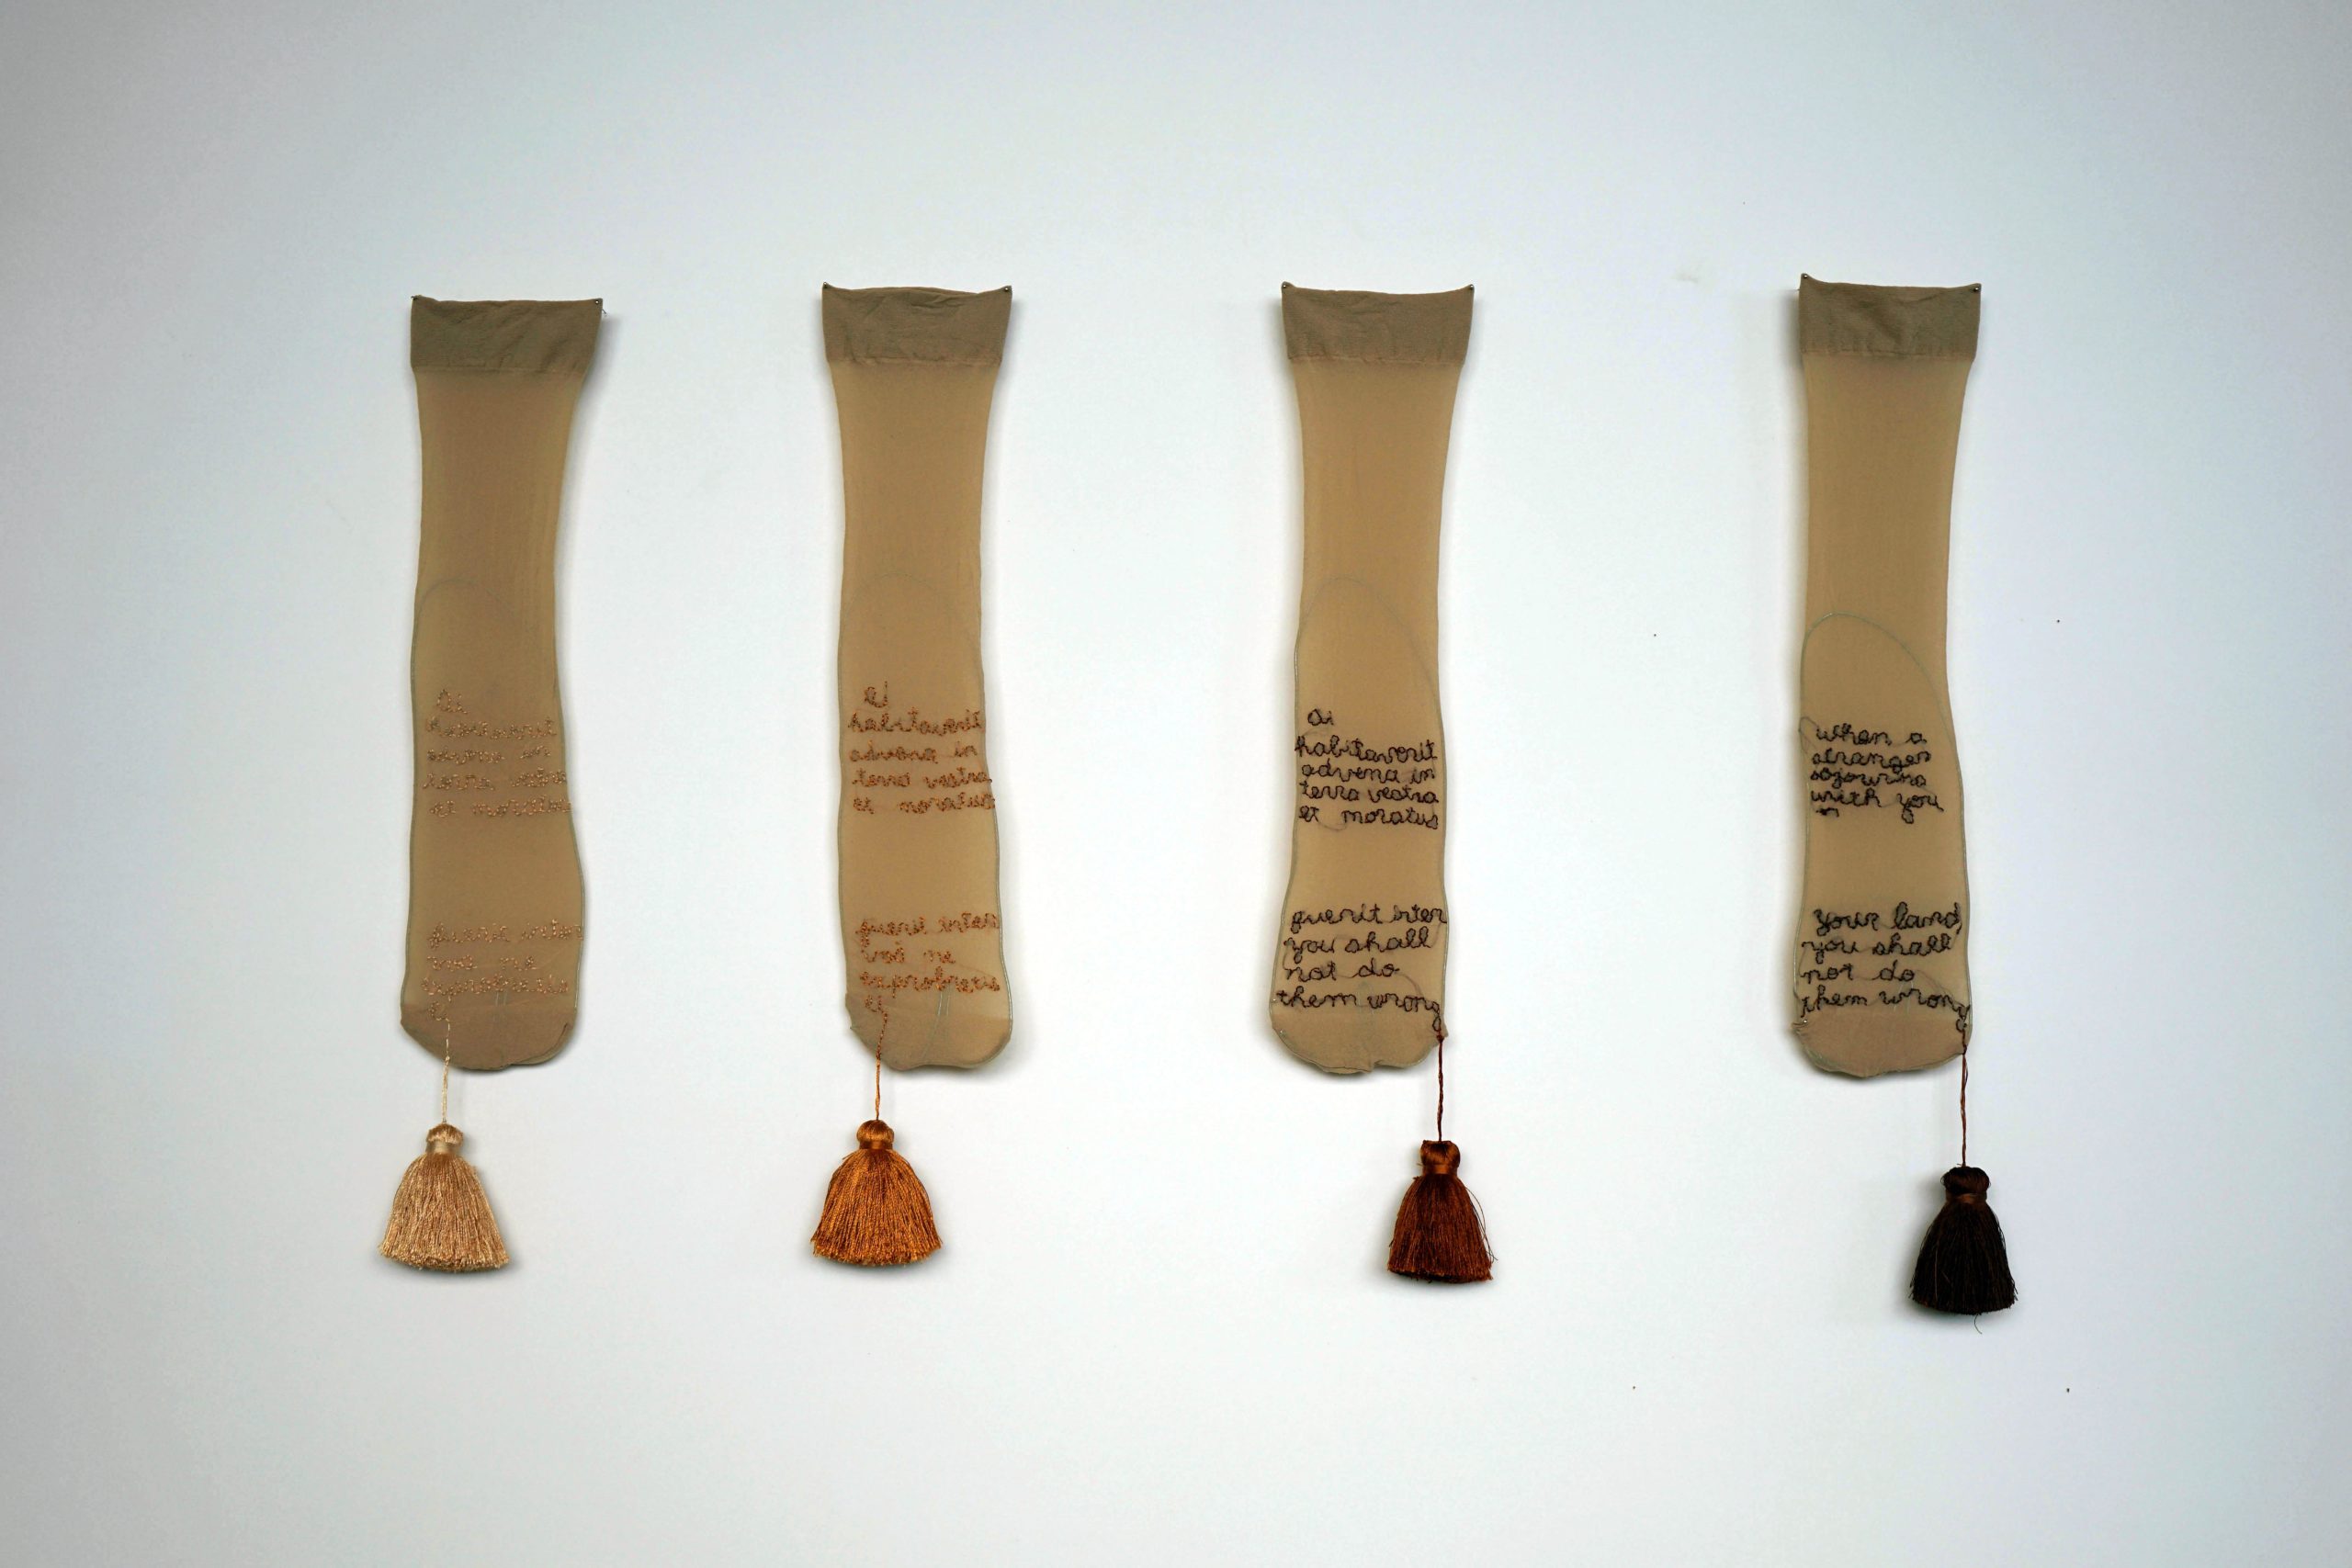 Dirt, Skin and Gold, 2019,Secondhand socks, silk thread embroidery, silk pom poms, 8 x 20 cm each. Socks embroidered with Old Testament text related to rights to land, translated in different ways. 